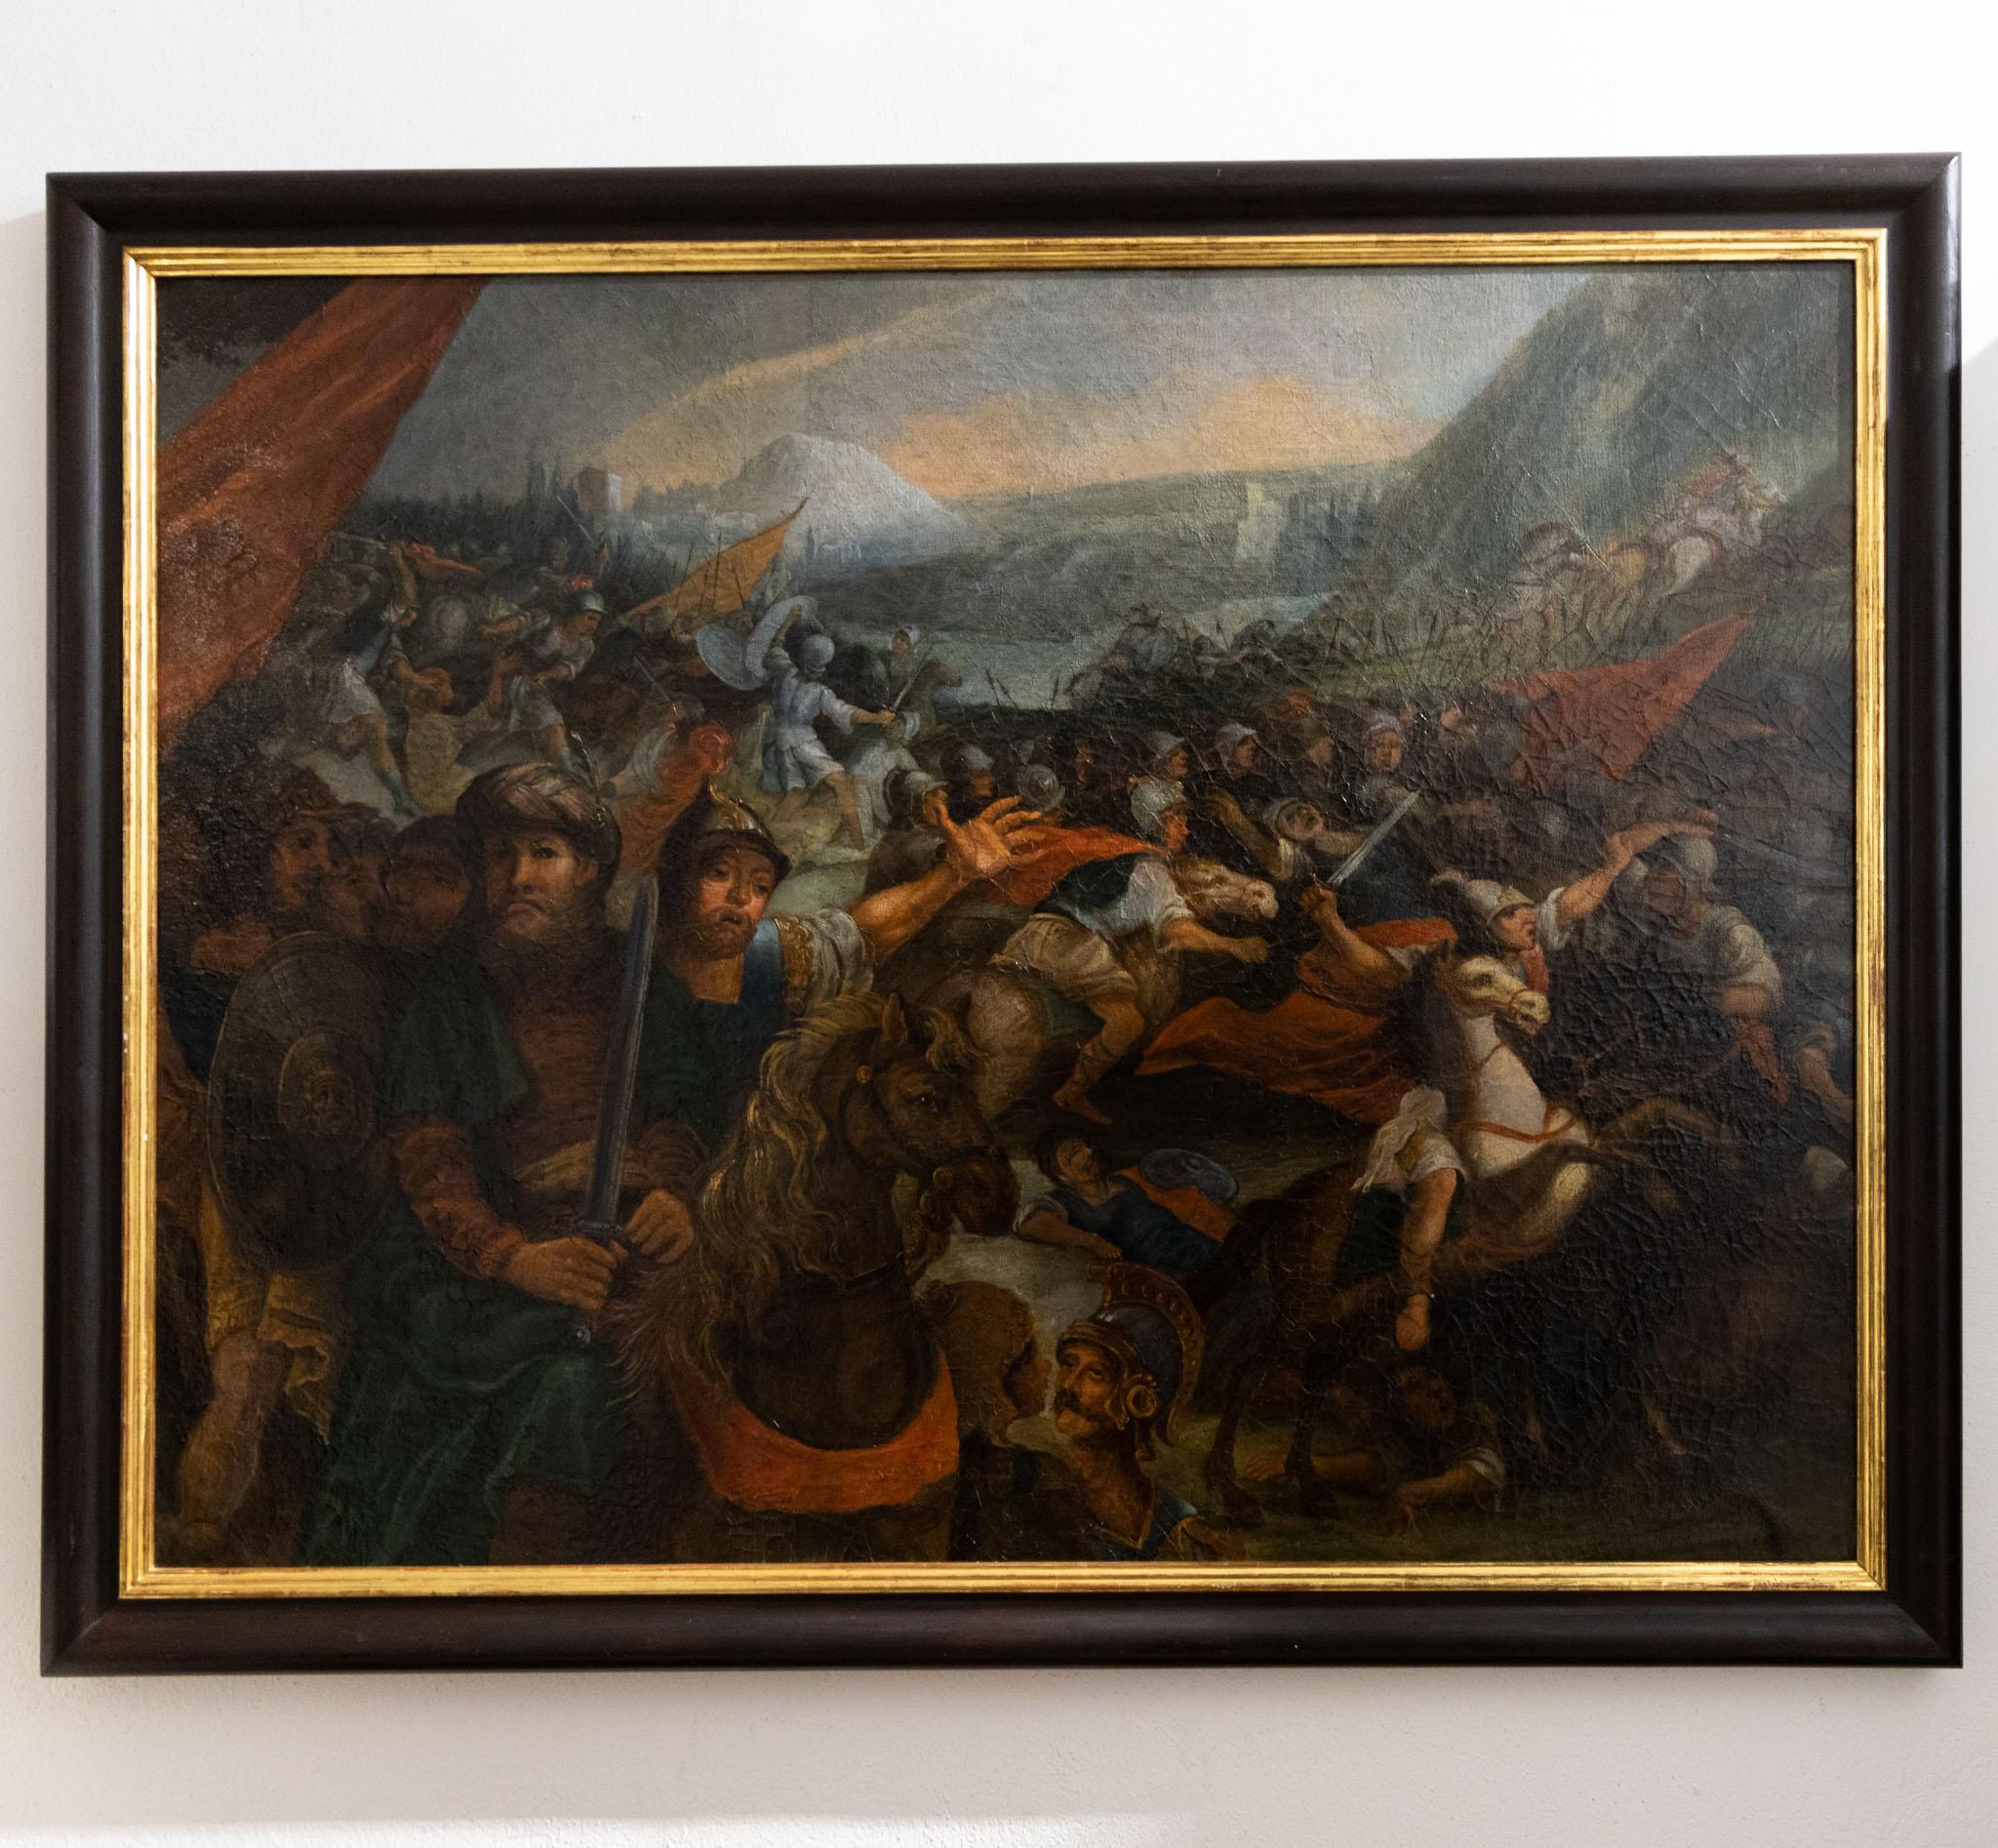 Antique battle scene with horsemen in front of landscape scenery. Oil on canvas. Framed in a black wooden frame with a gold patinated moulding. The canvas with strong craquelure. Size without frame: 108.5 x 143 cm